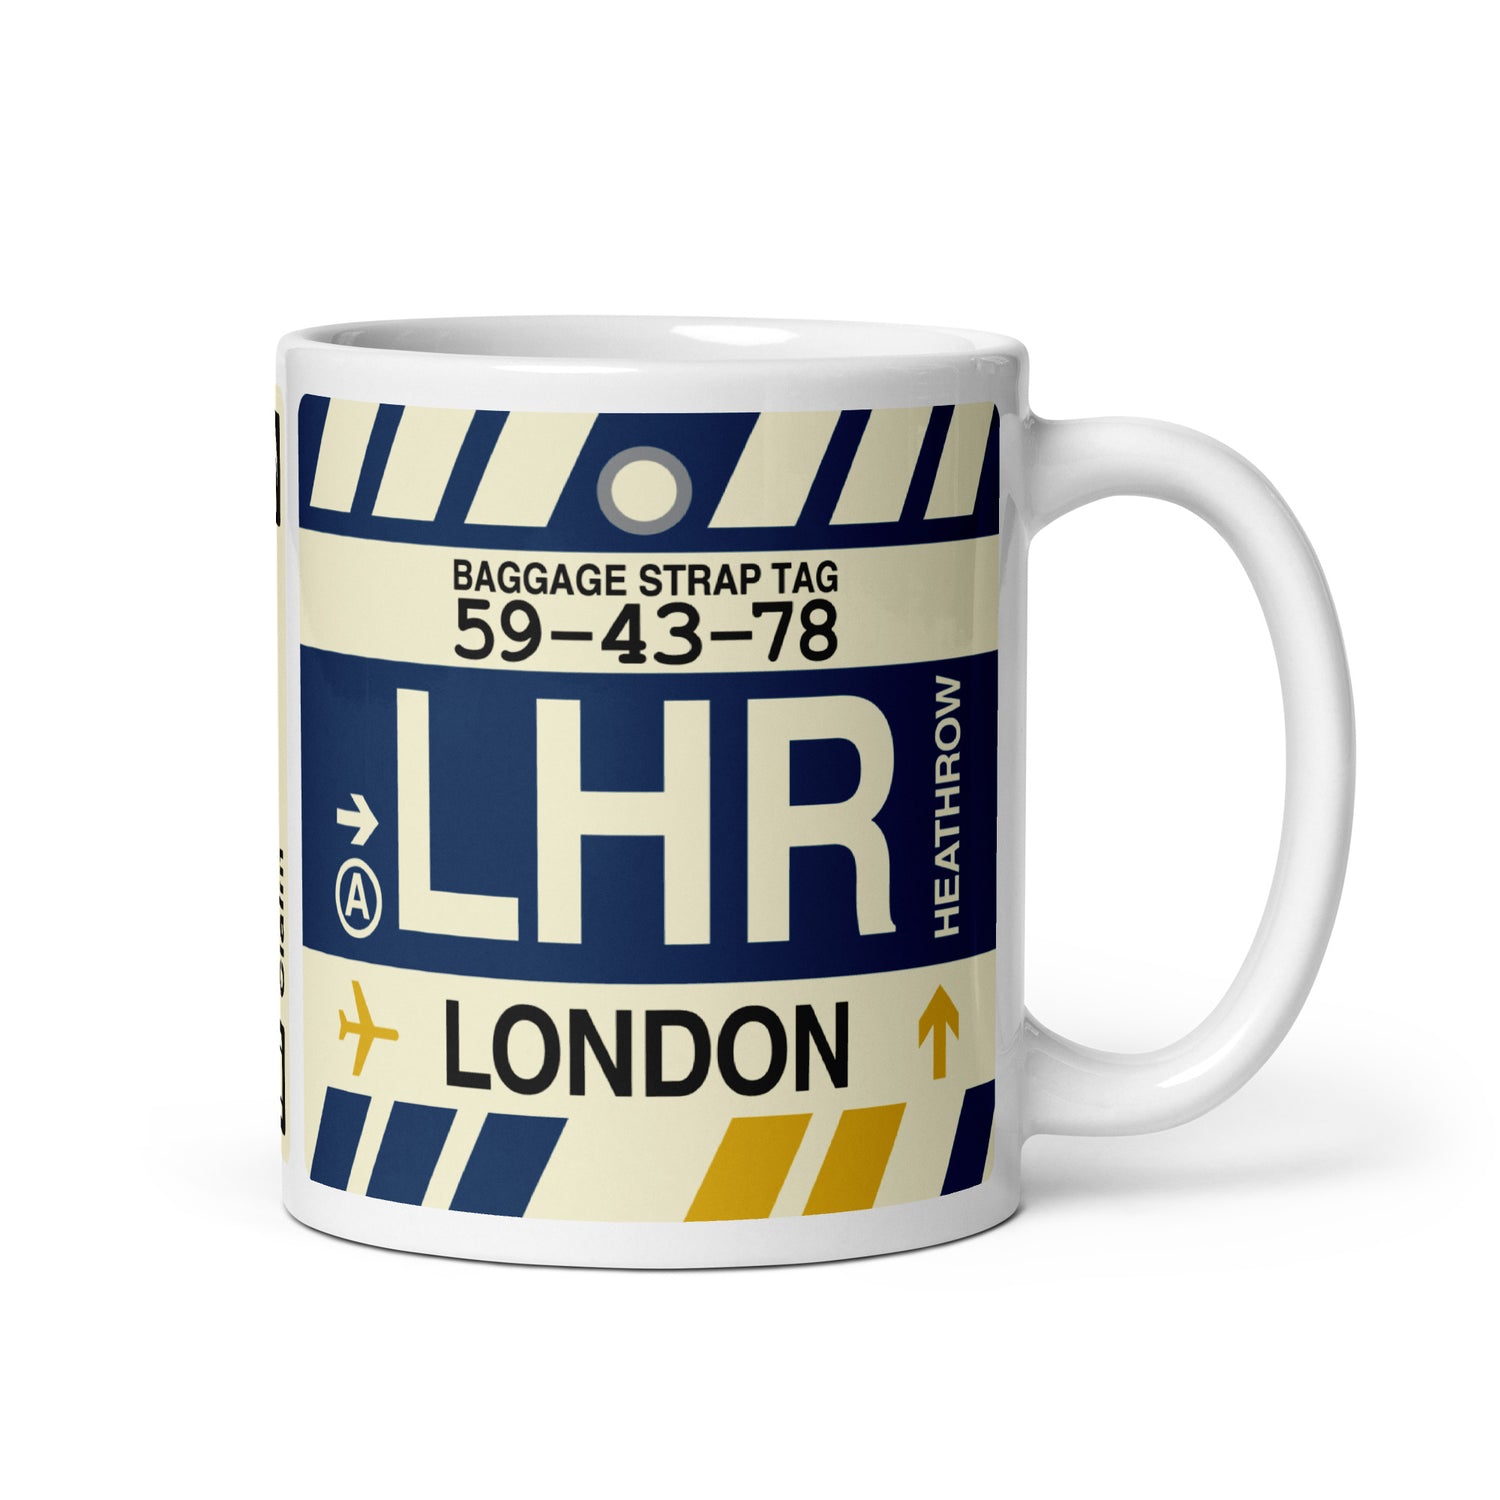 London England Coffee Mugs and Water Bottles • LHR Airport Code